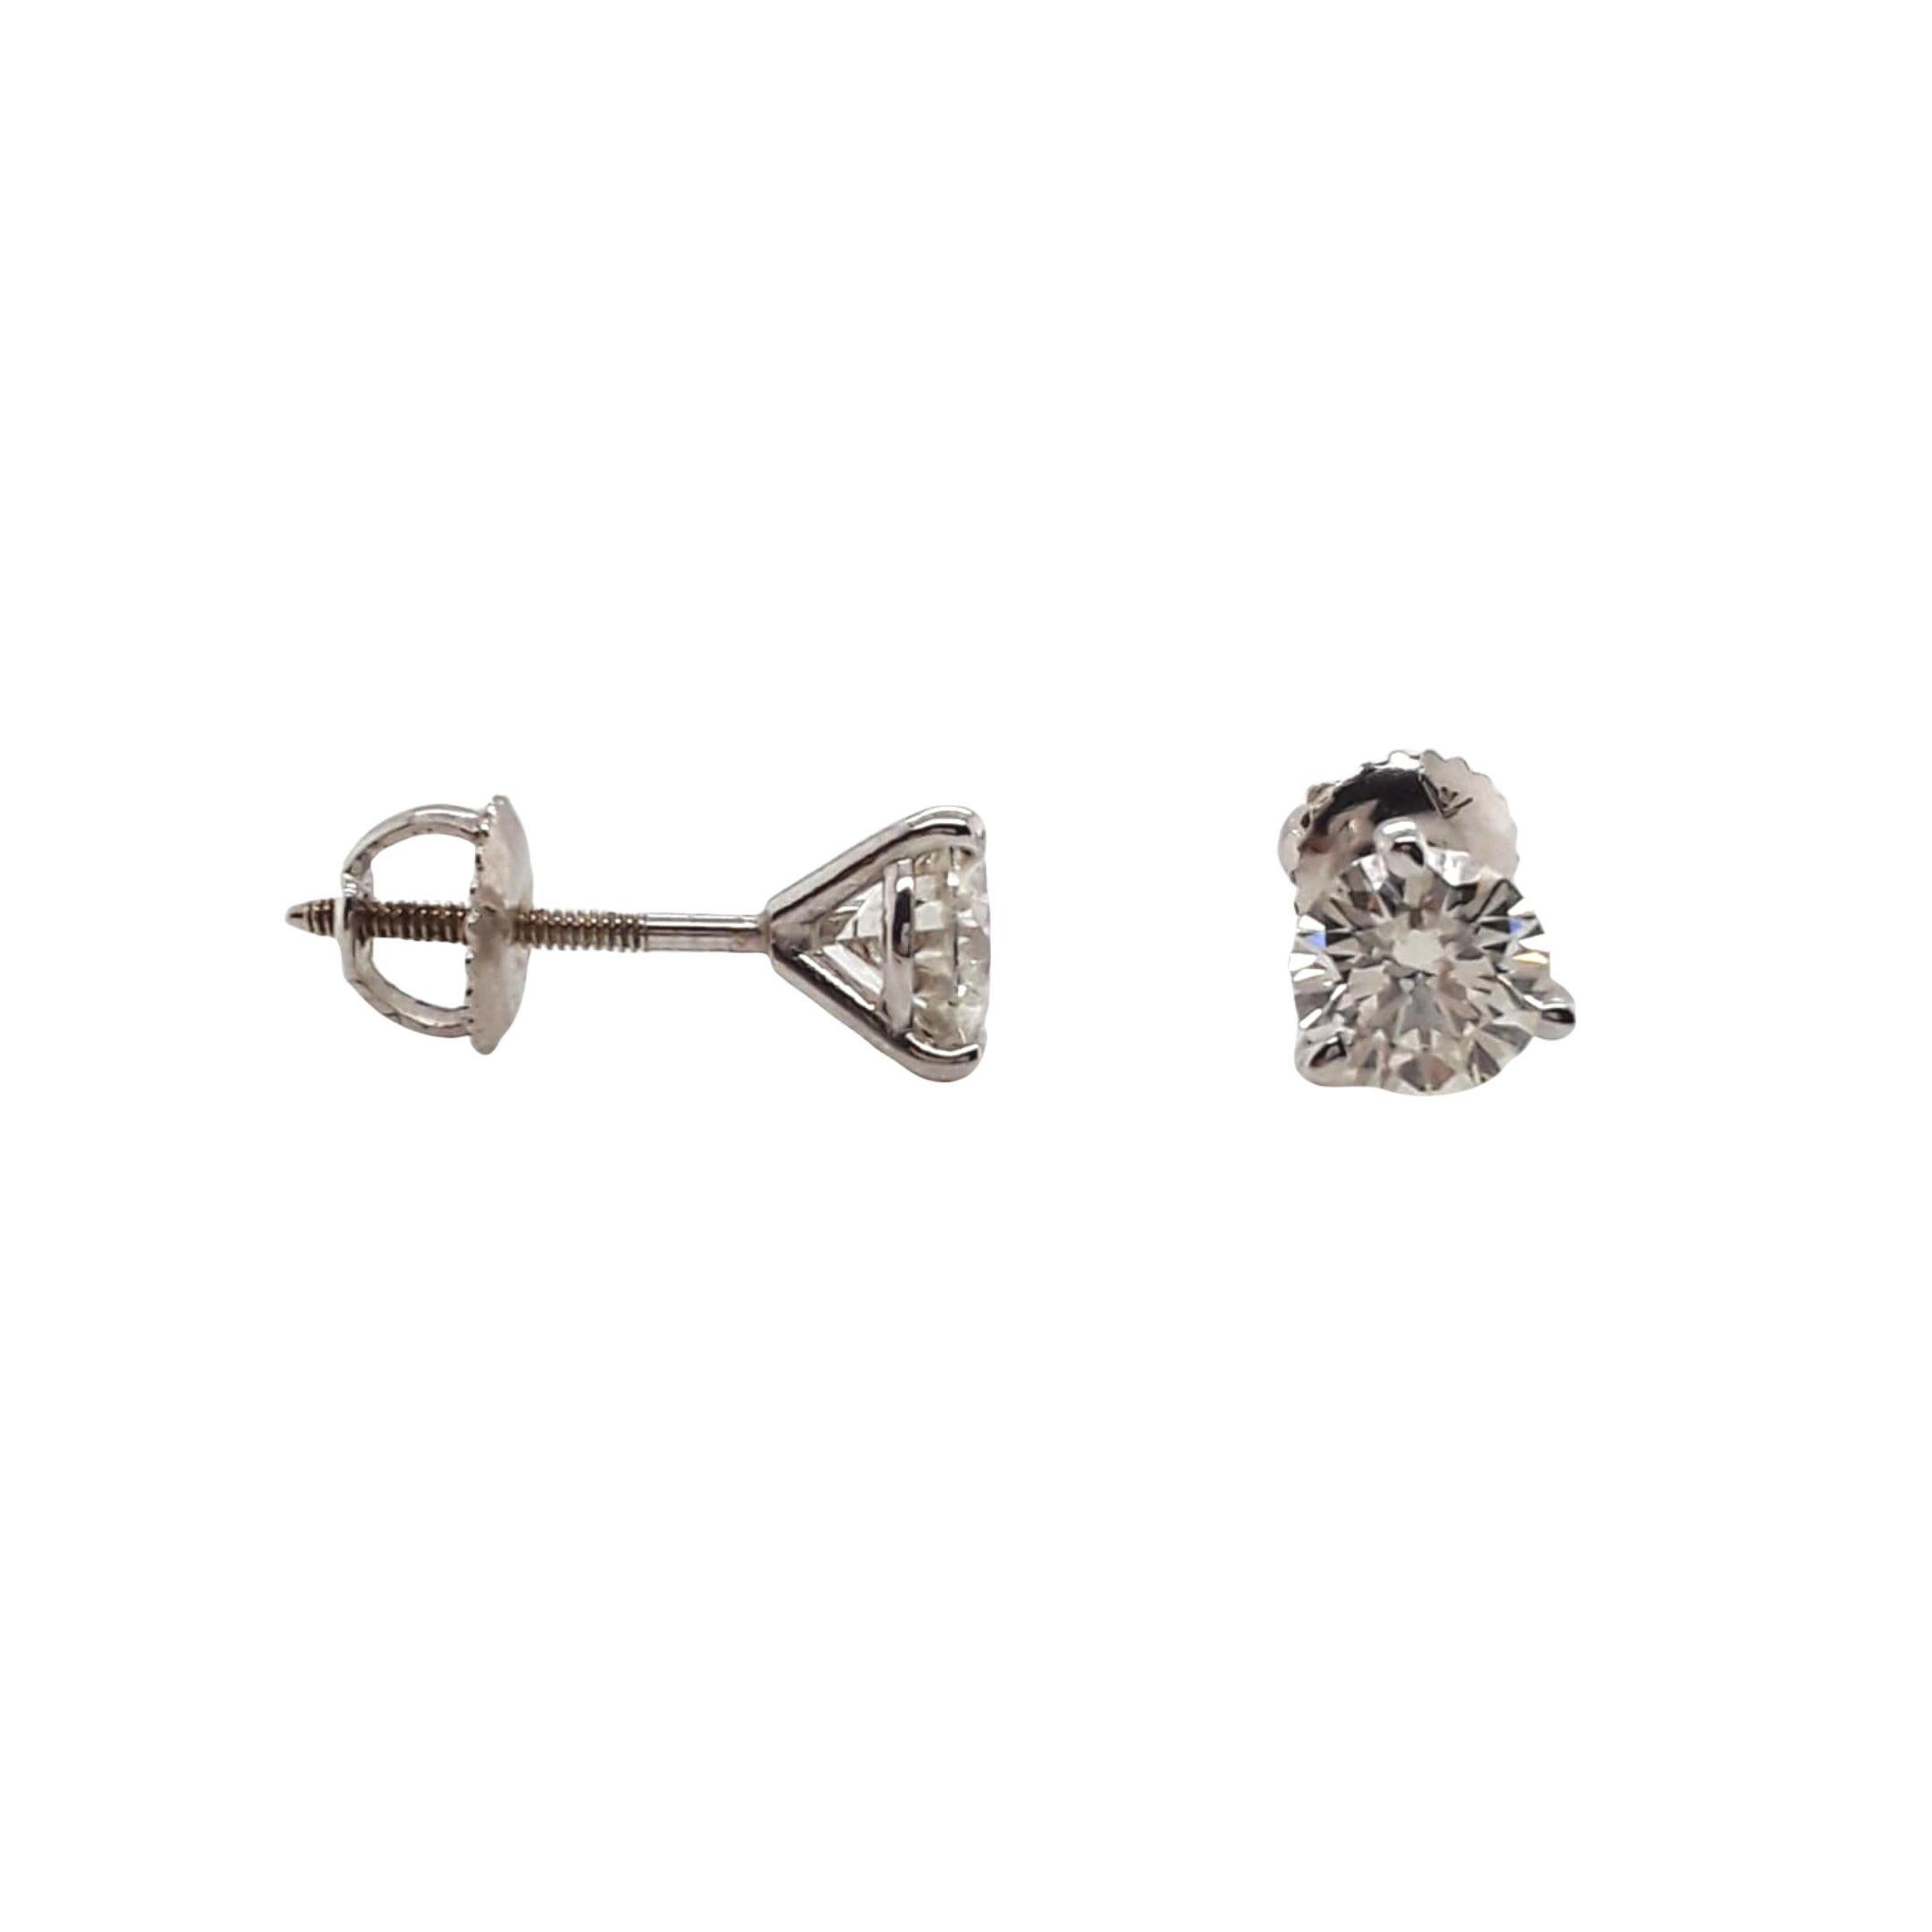 Diamond Stud Earrings made with natural brilliant cut diamonds. Total Weight: 1.42 carats, Stone Diameter: 5.75 x 5.79. Set on a 4 prong mounting in 18 karat white gold, screw back setting. 